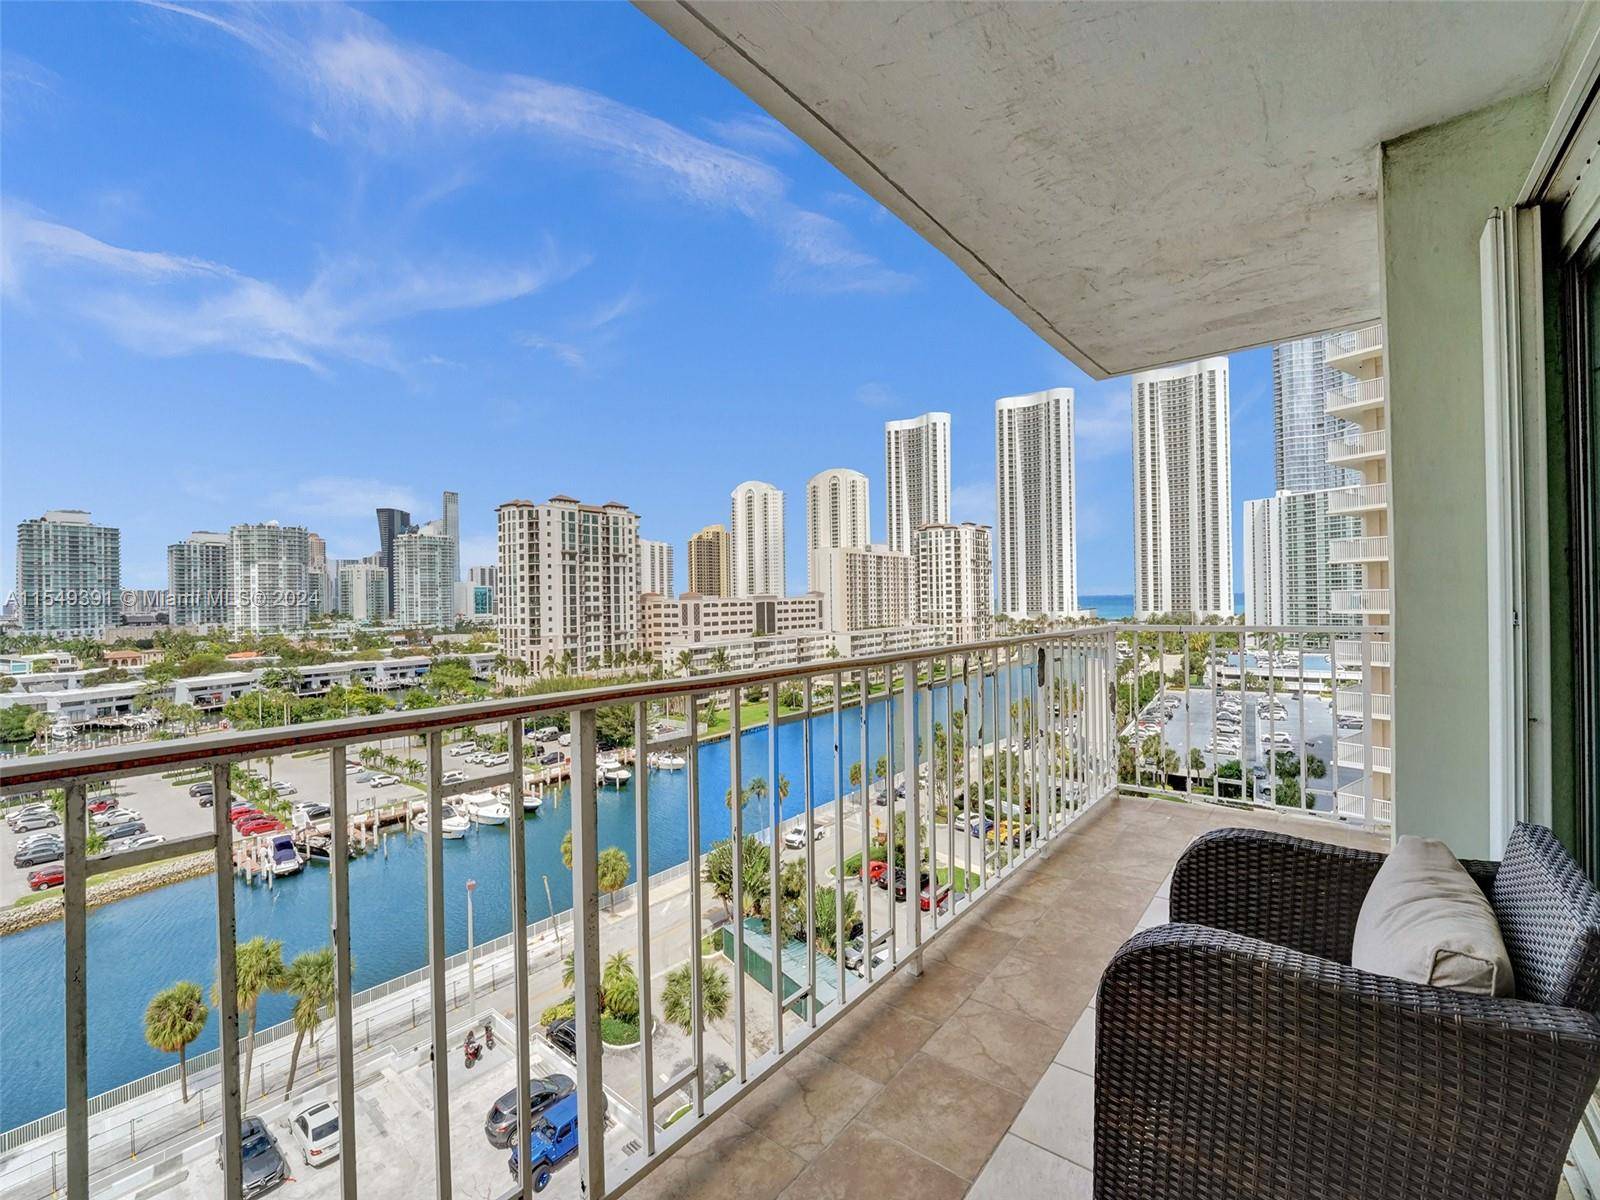 Corner Unit with wrap around balcony giving you pretty water views all over.